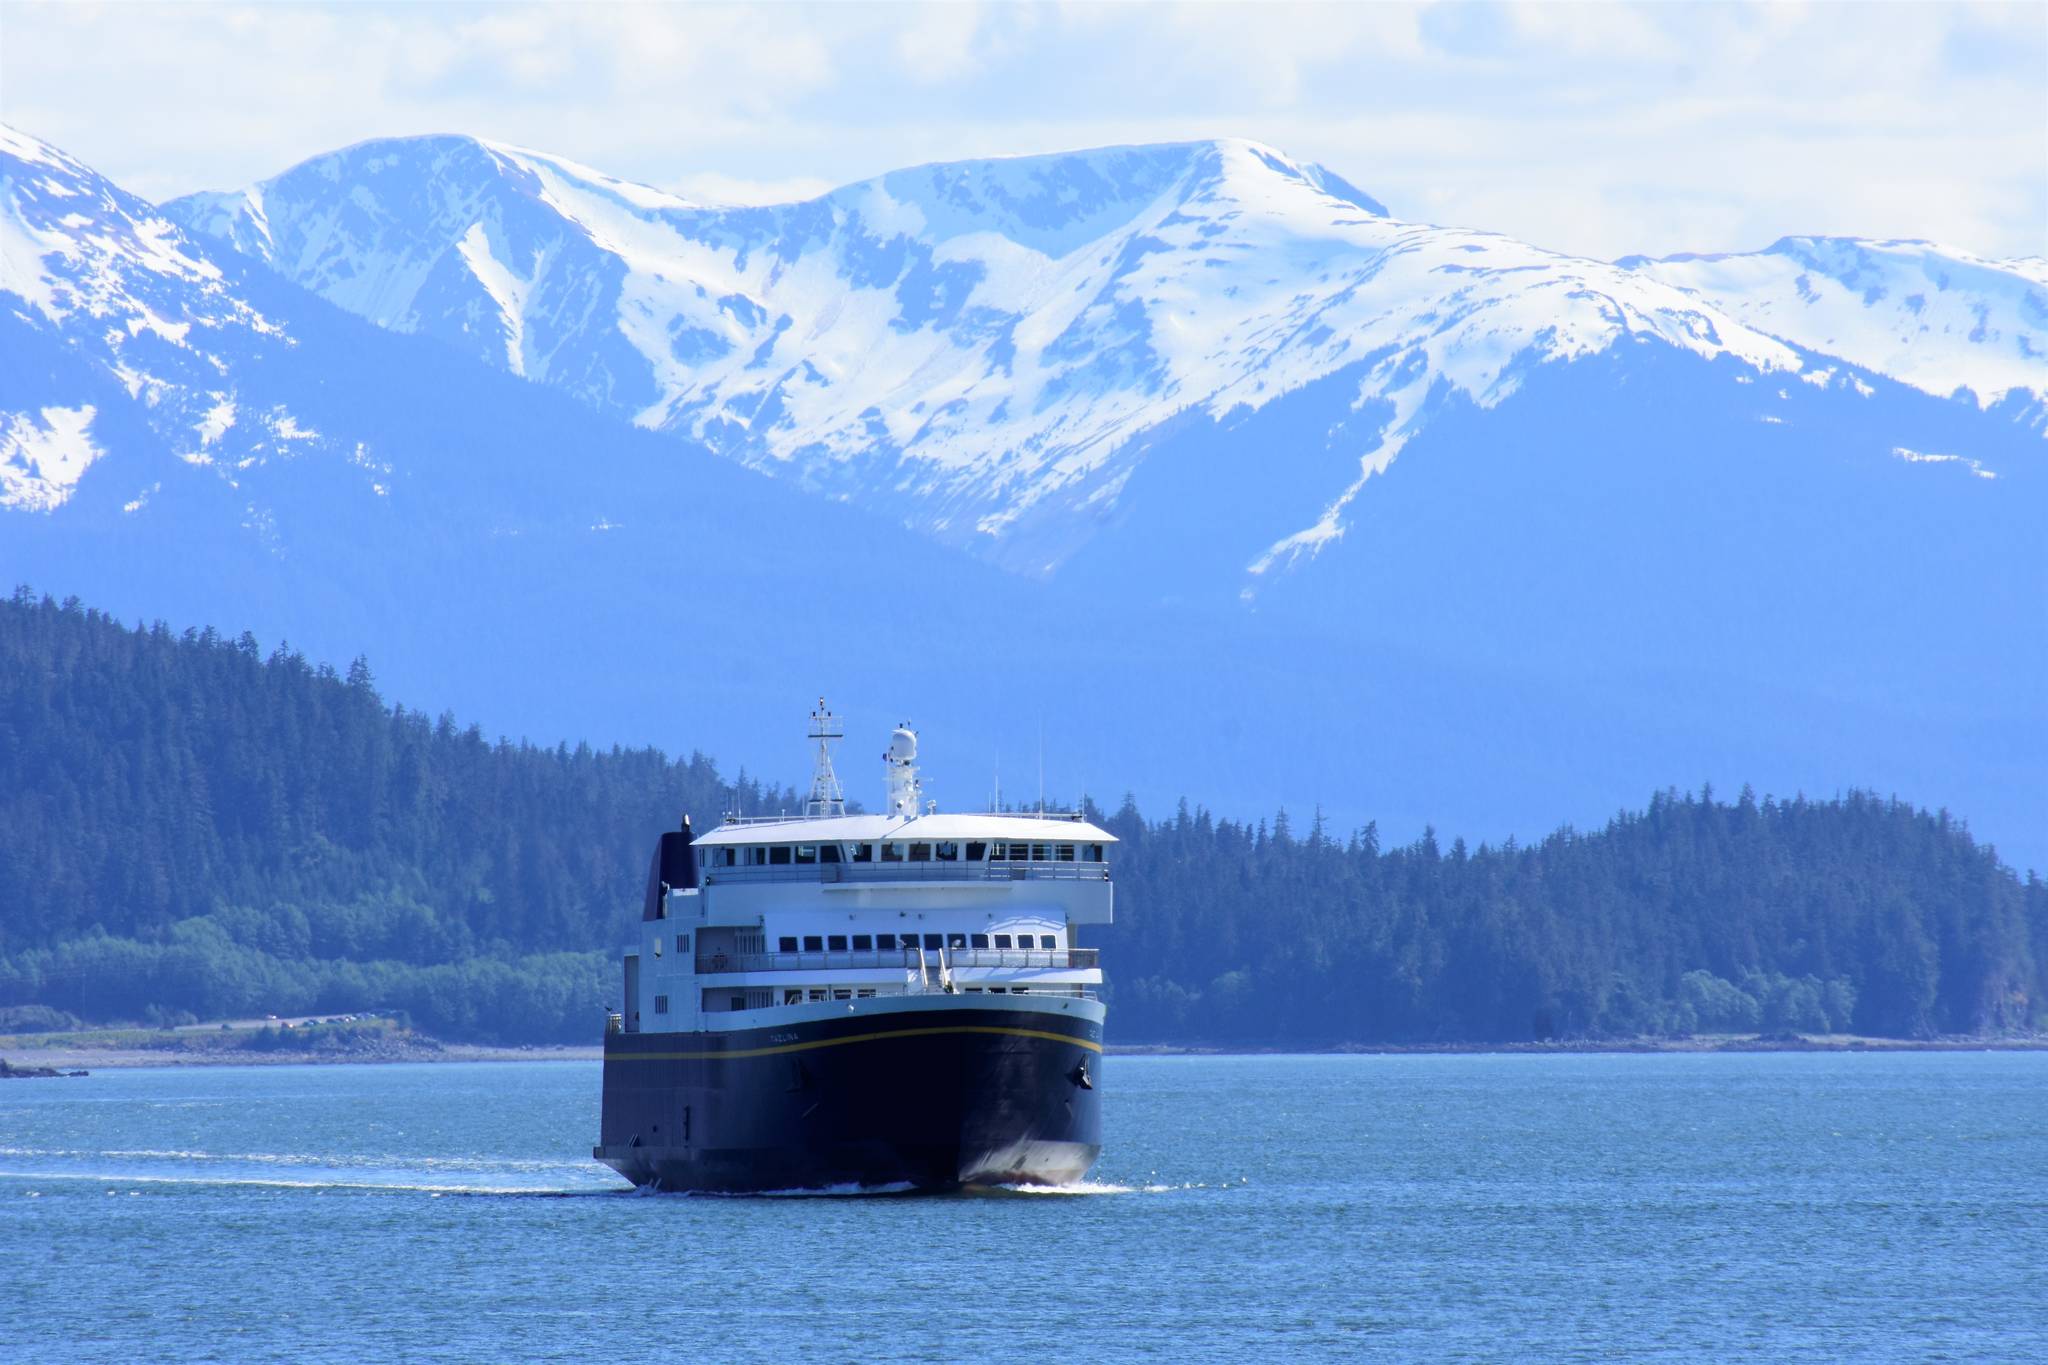 The M/V Tazlina arrives in Juneau on Saturday, May 16, 2020. A group of passengers traveling from Hoonah were denied their return journey May 29, forcing them to make alternate travel plans. Hoonah’s mayor says the incident was upsetting for many in the community, who rely on being able to come to Juneau for groceries and medical appointments. (Peter Segall | Juneau Empire)